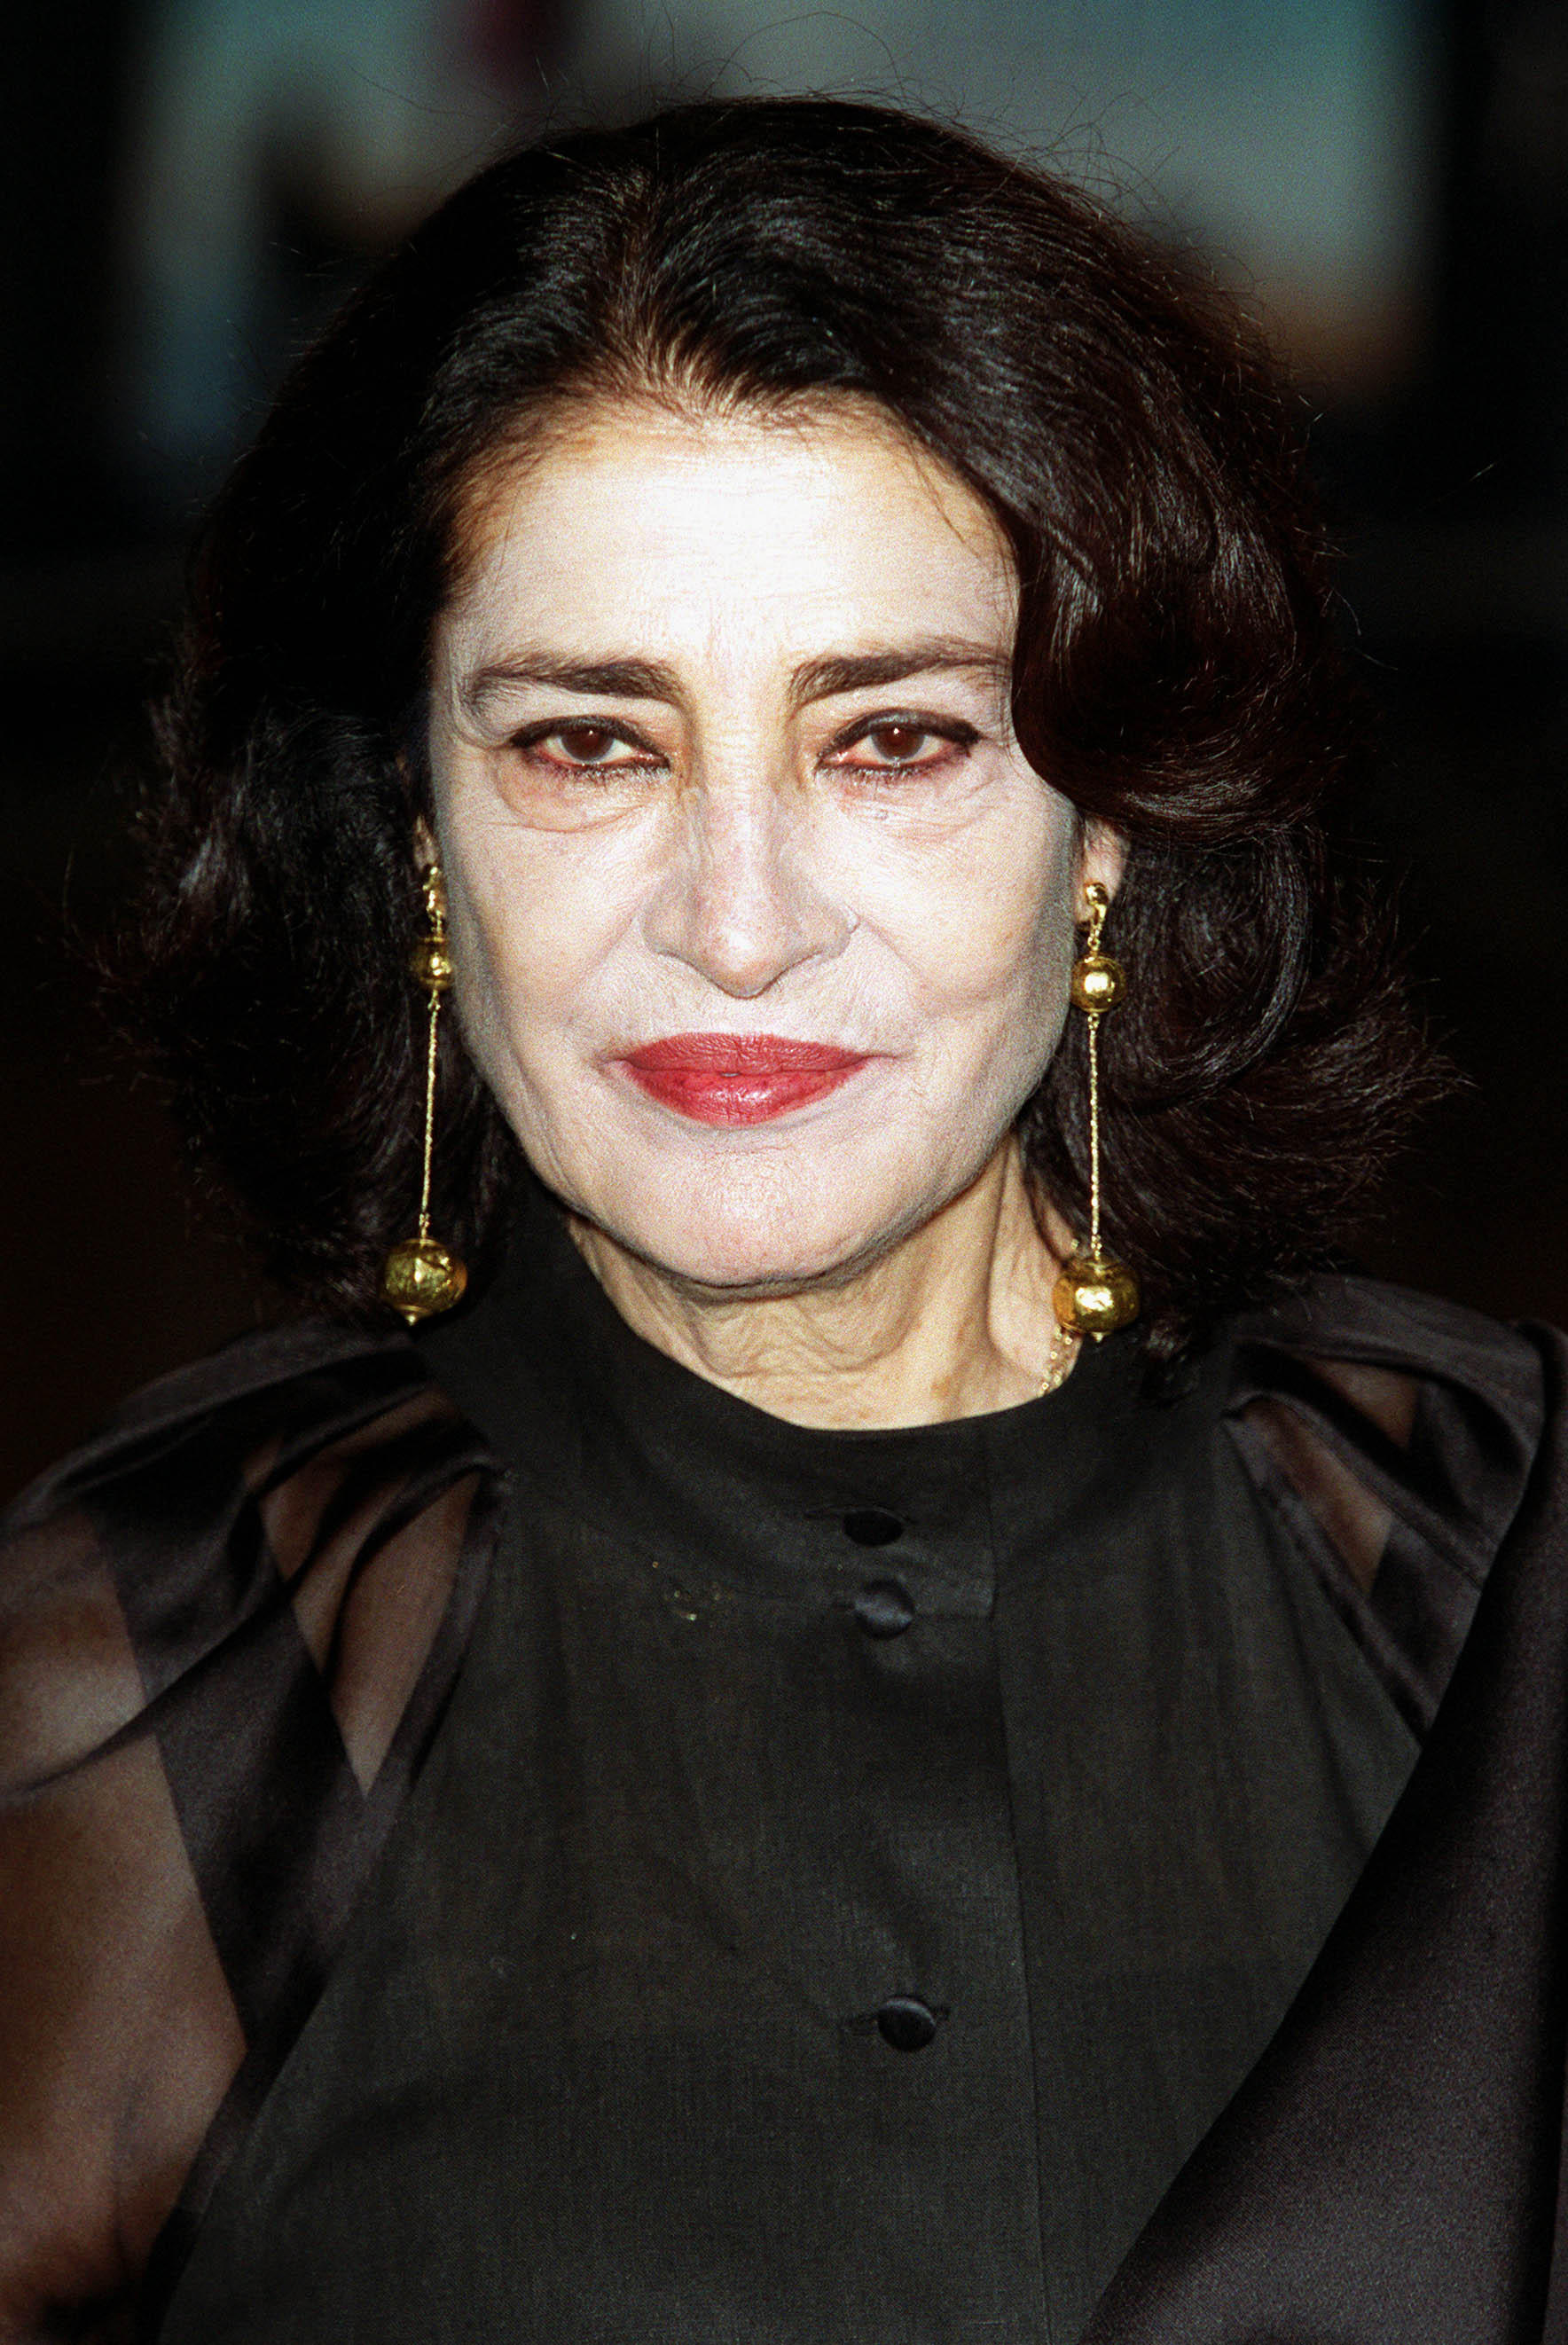 Greece S Irene Papas Who Earned Hollywood Fame Dies At 93 North